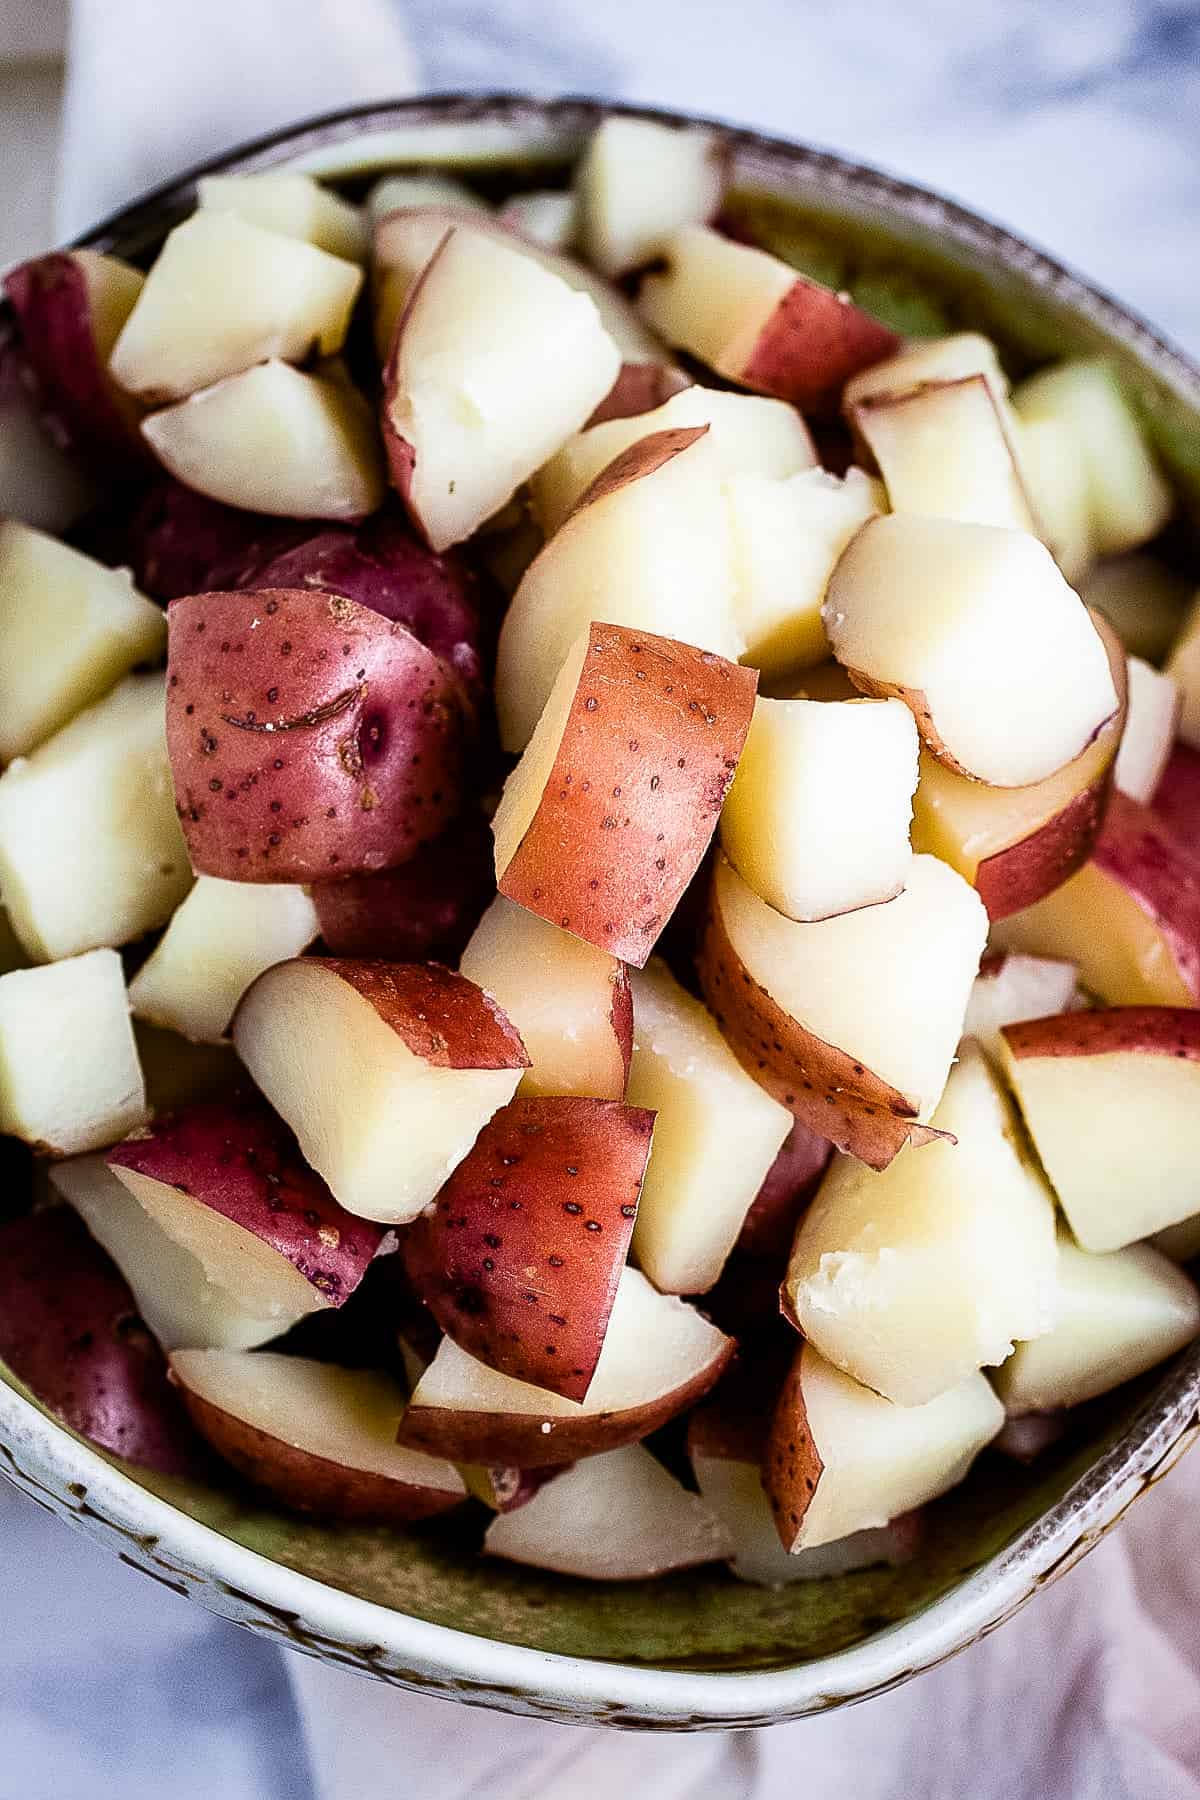 Chopped red potatoes in large bowl